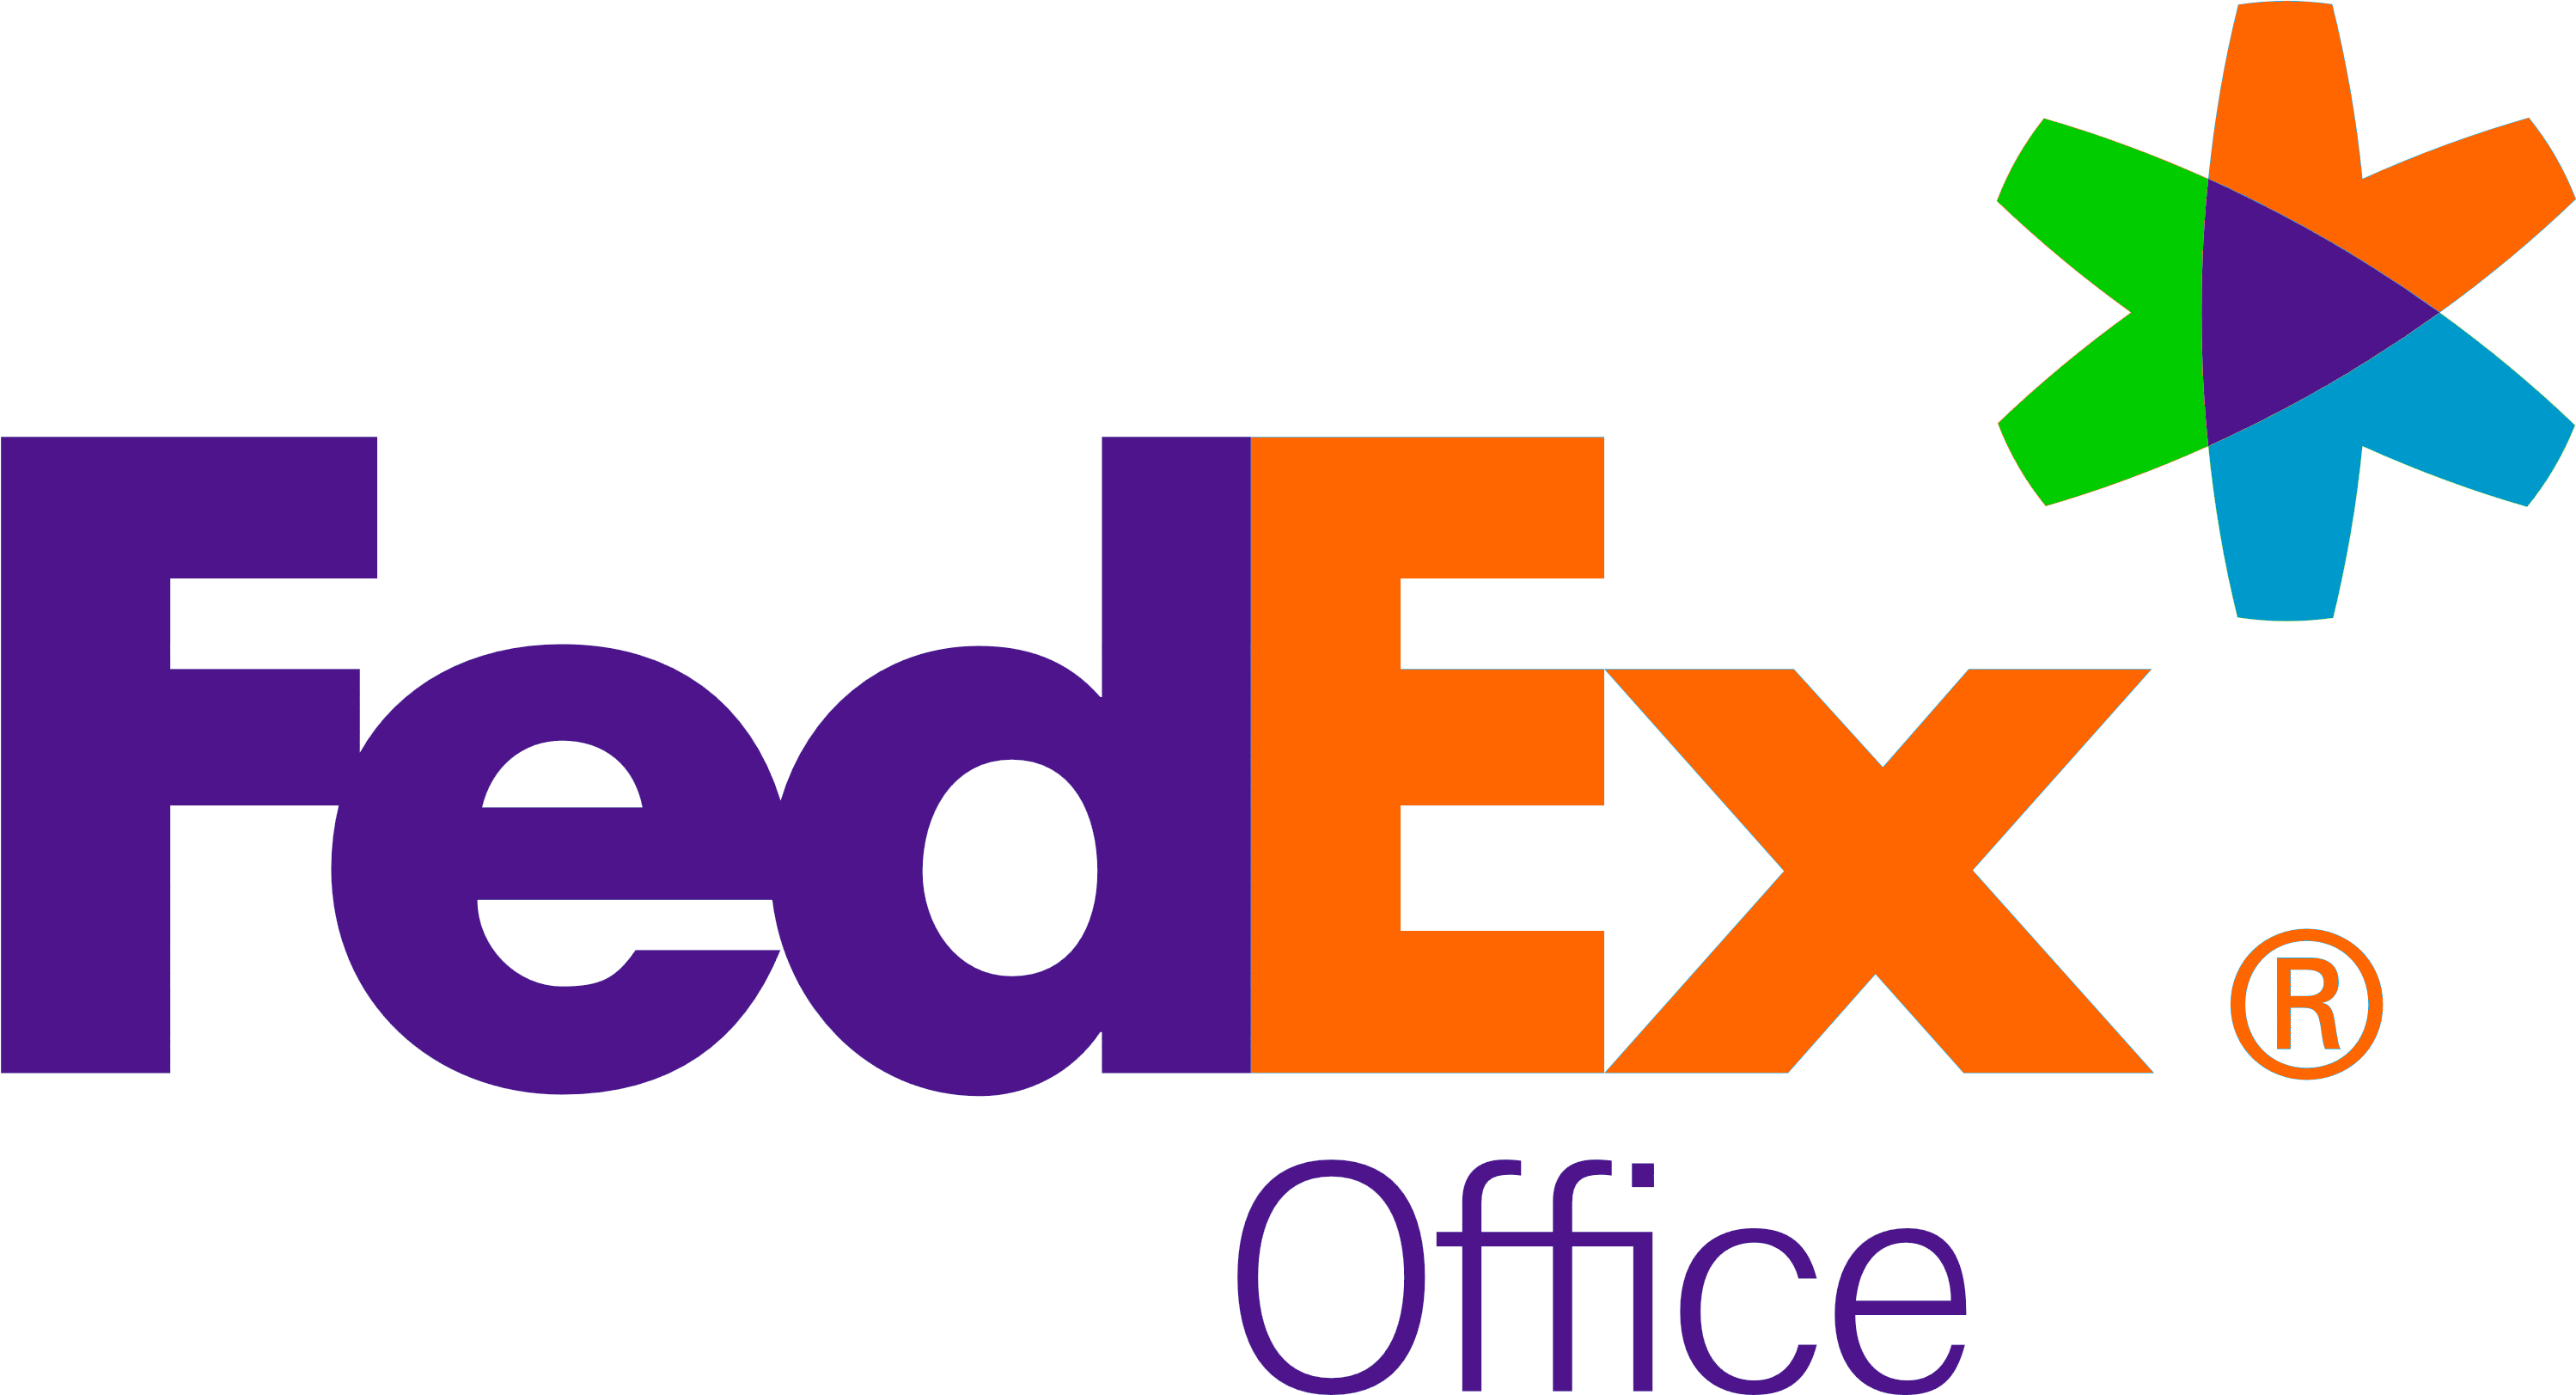 Fedex Office Png - Fedex Office Logo Clipart (3350x1800), Png Download